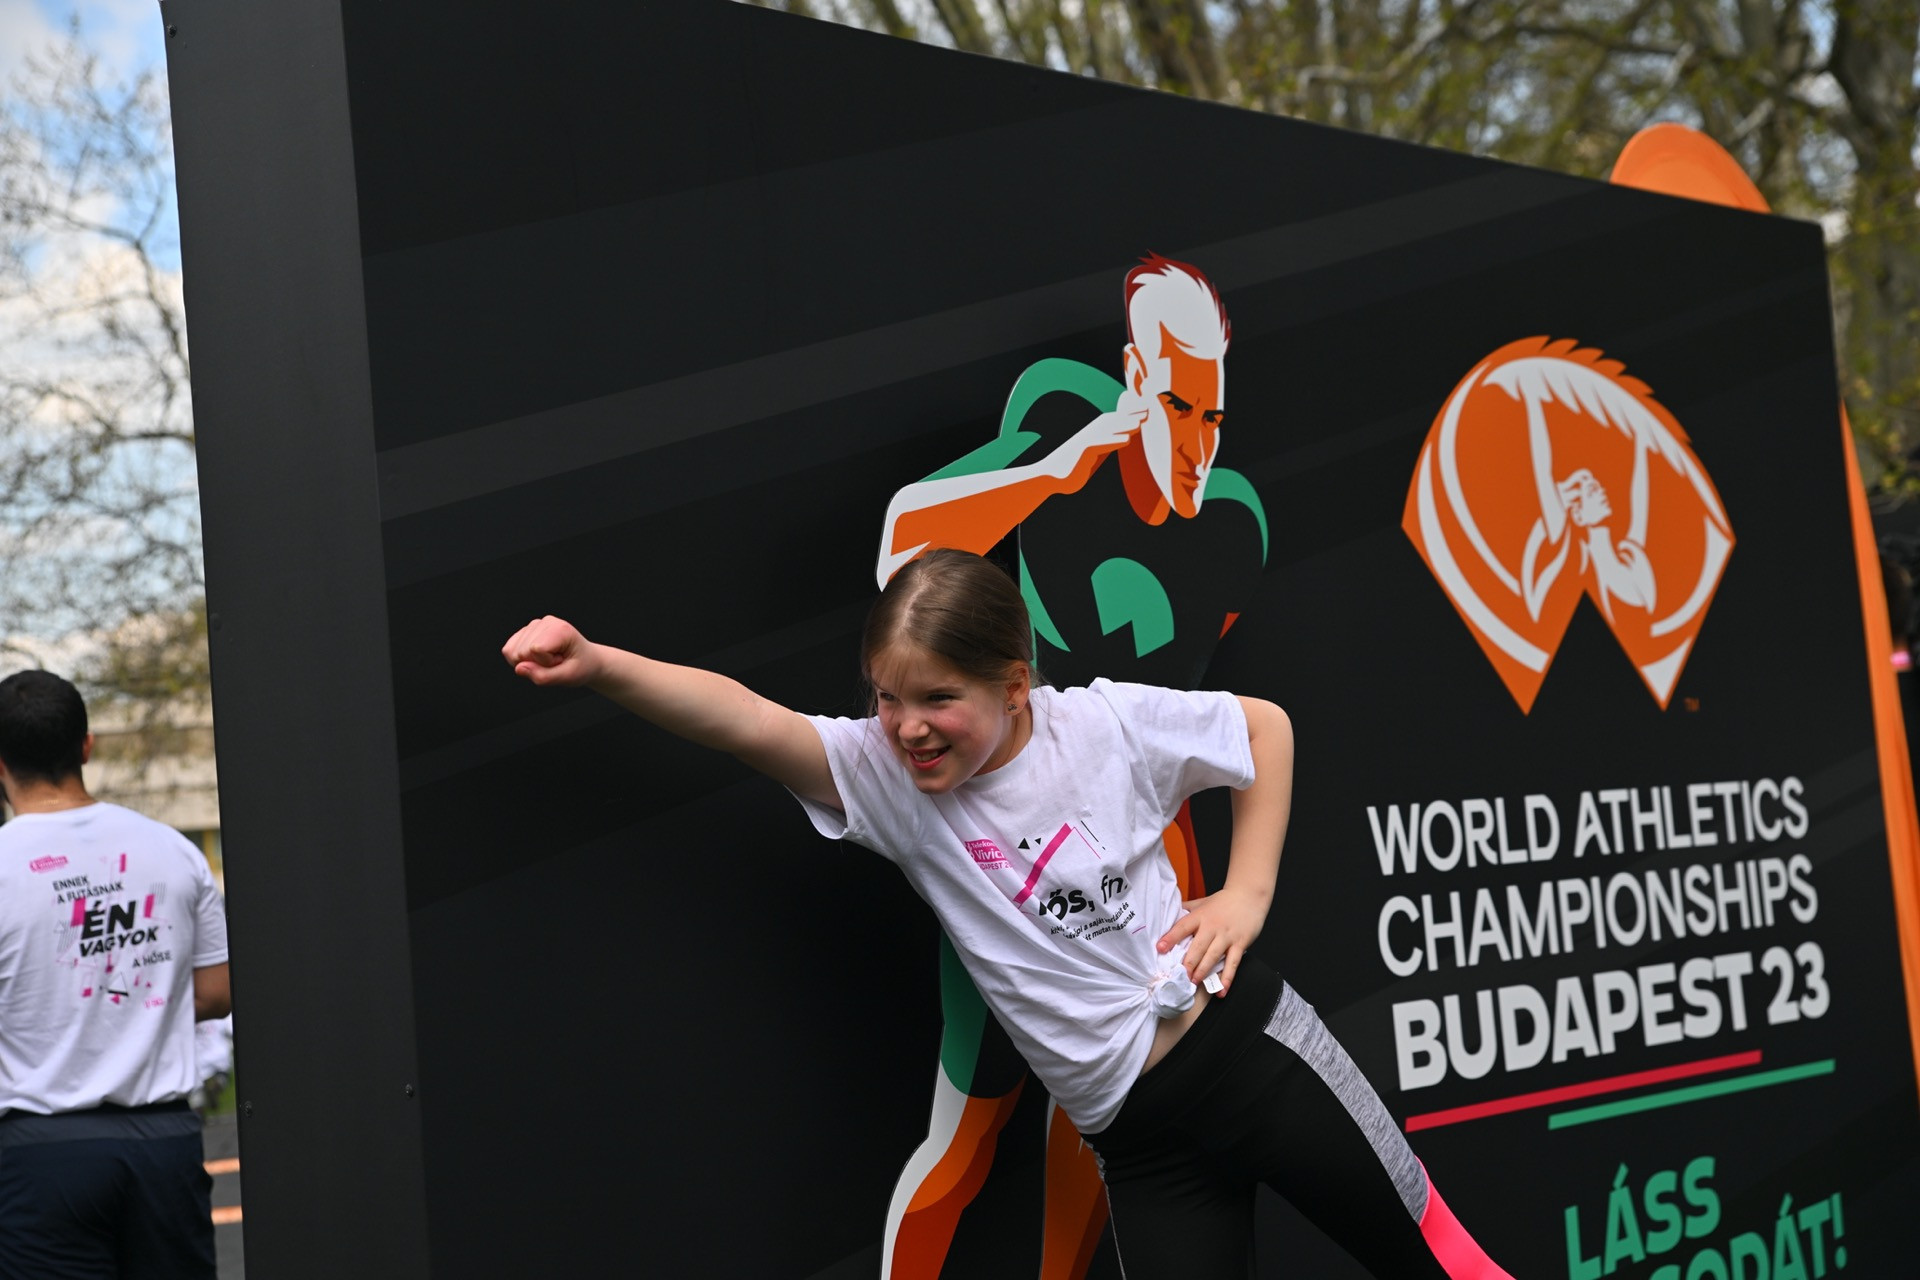 Budapest 2023 organisers offer thousands of free tickets to schools